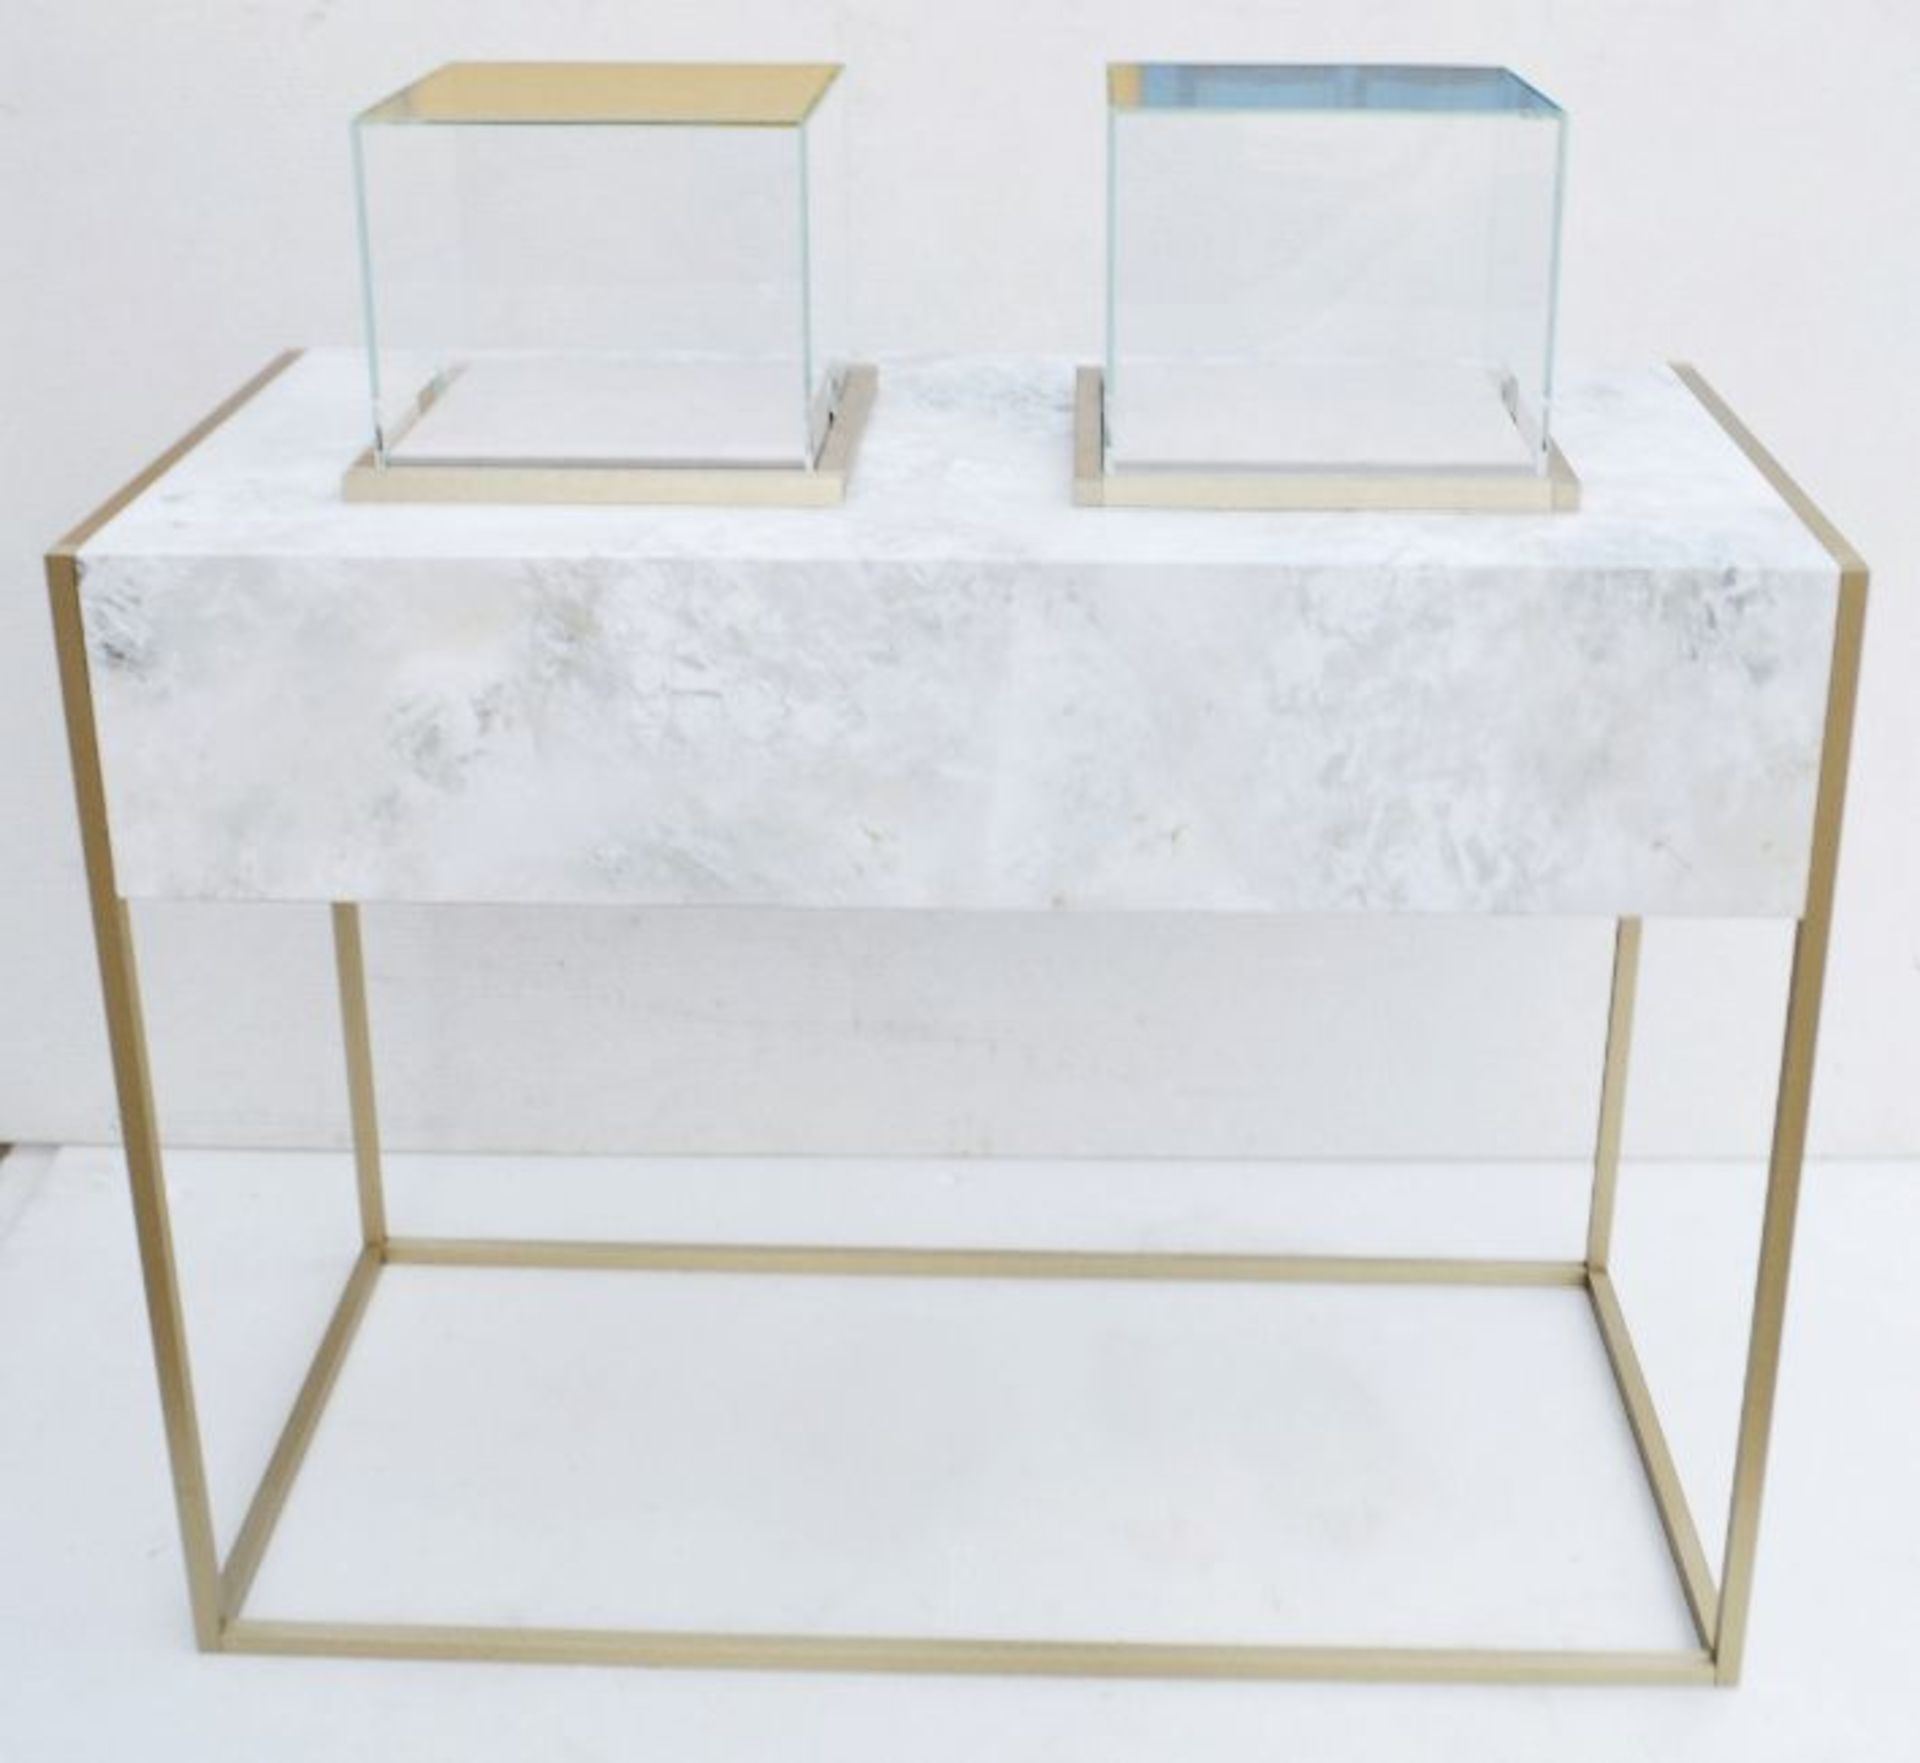 1 x BALDI Designer Retail Display Counter Featuring A Marble Effect Aesthetic And 2 x Clear Glass